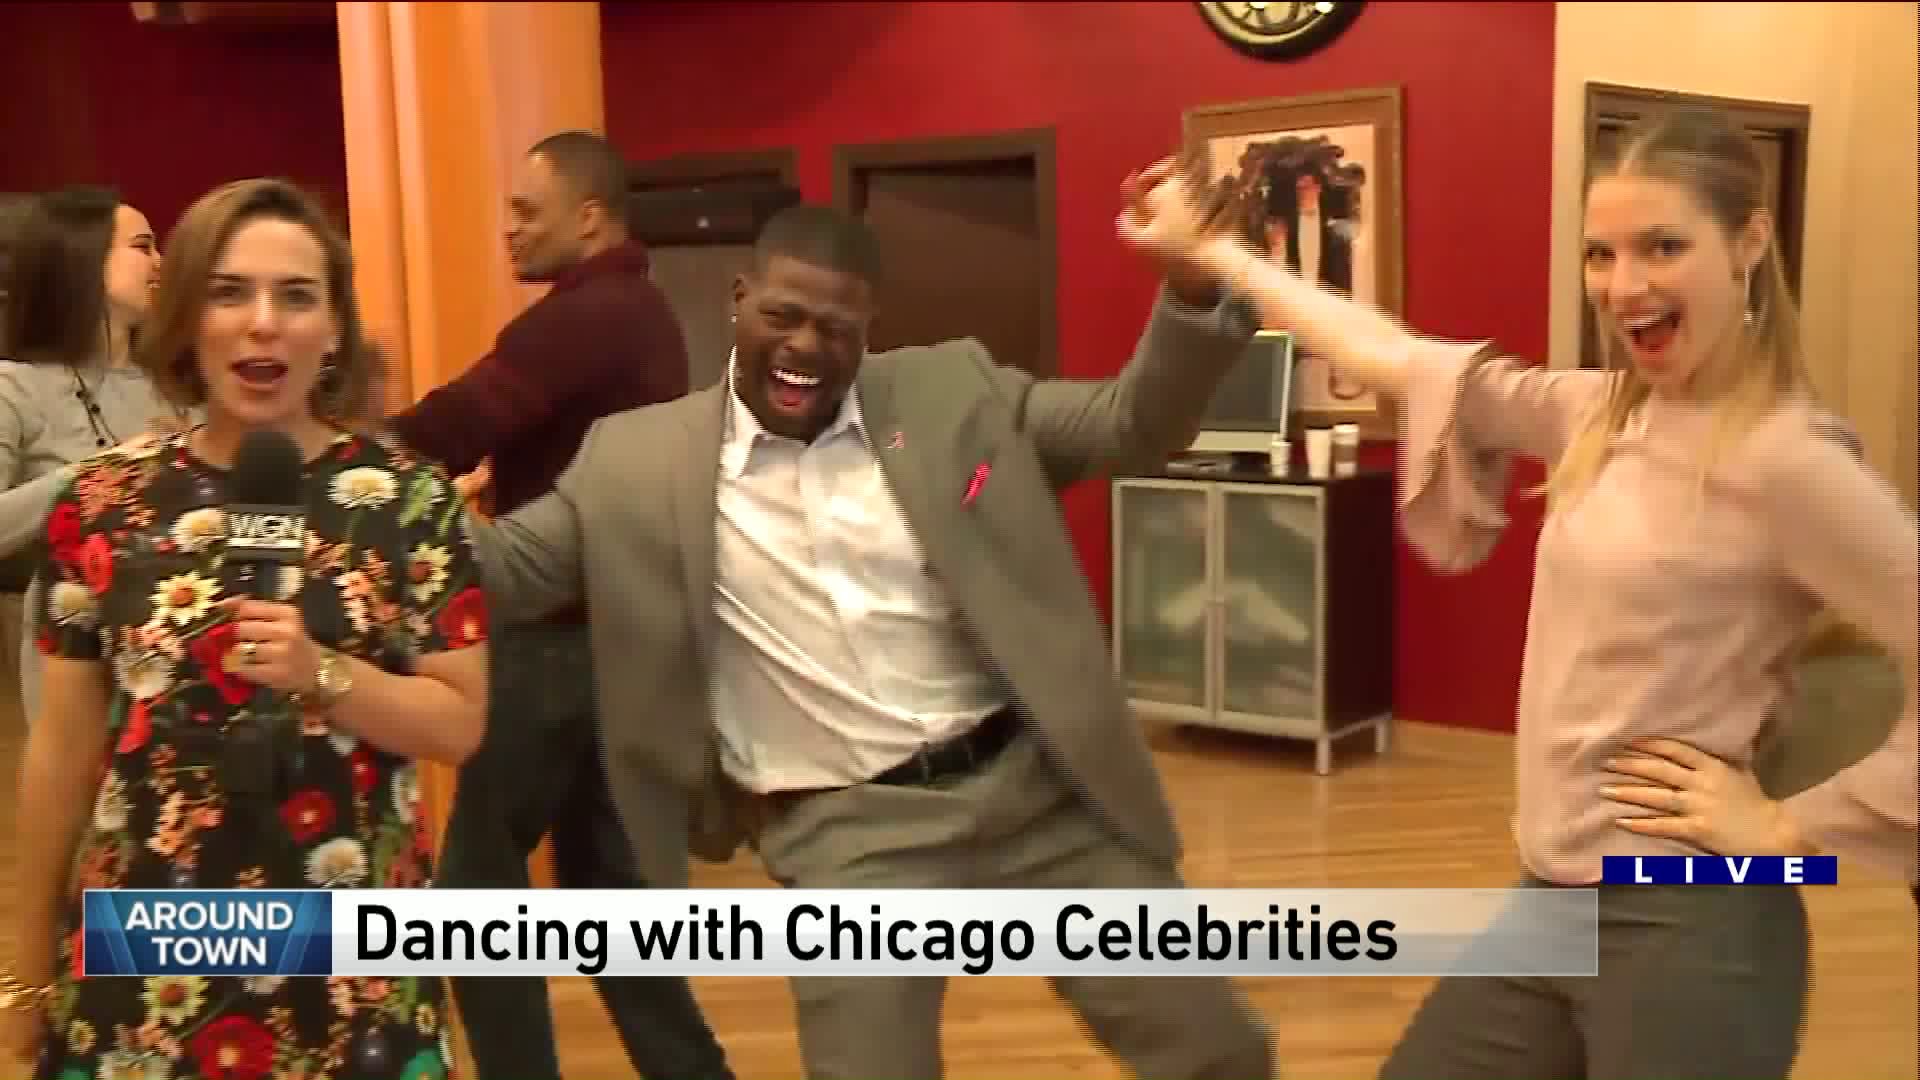 Around Town previews the new team for Dancing with Chicago Celebrities